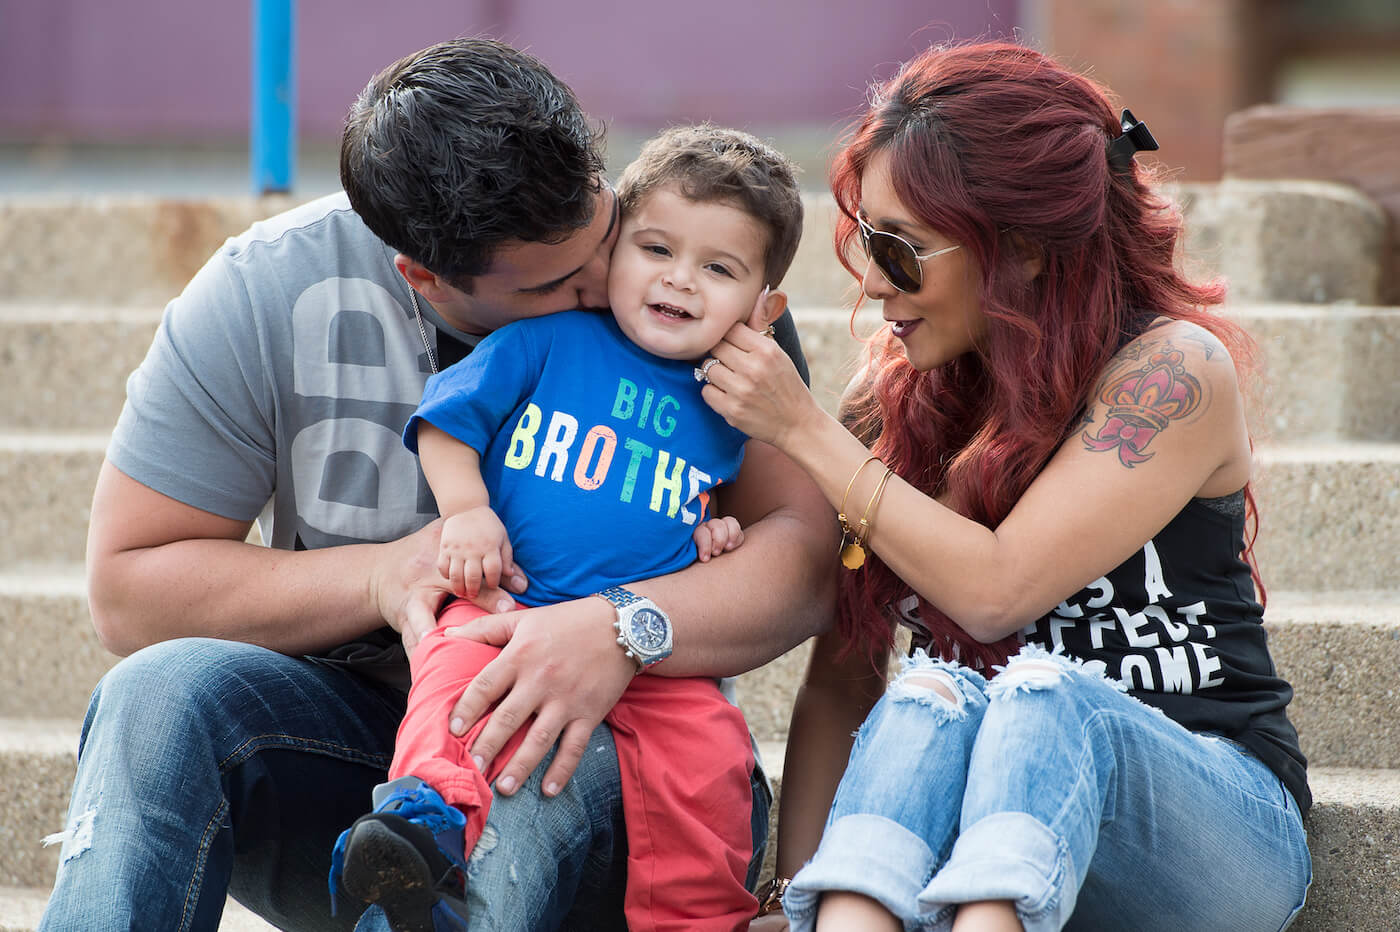 'Jersey Shore: Family Vacation' Season 7 star Nicole 'Snooki' Polizzi and Jionni LaValle, pictured with their son, Lorenzo LaValle